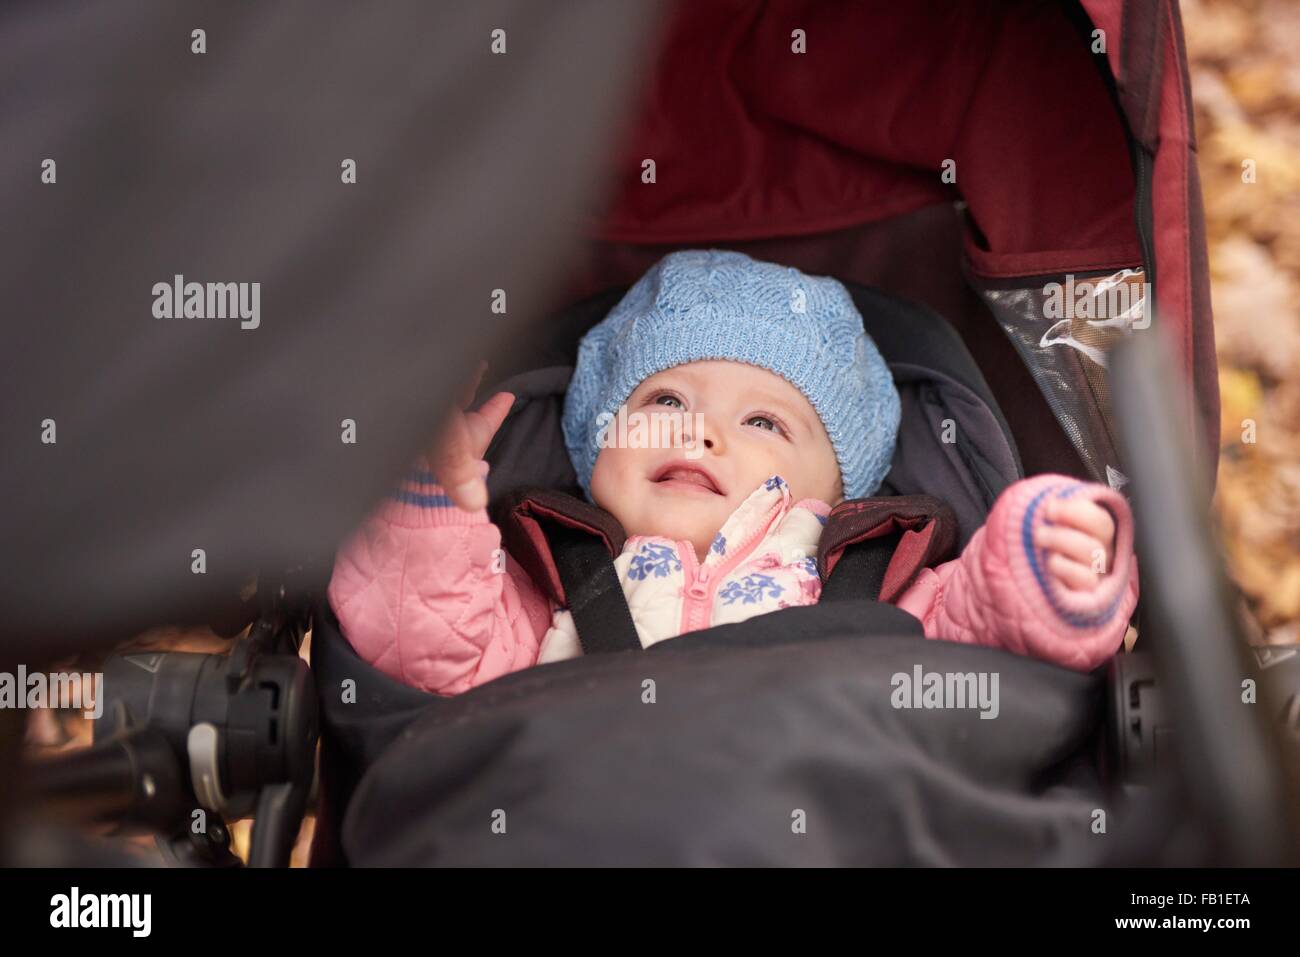 Baby girl wearing blue hat looking up from baby carriage Stock Photo